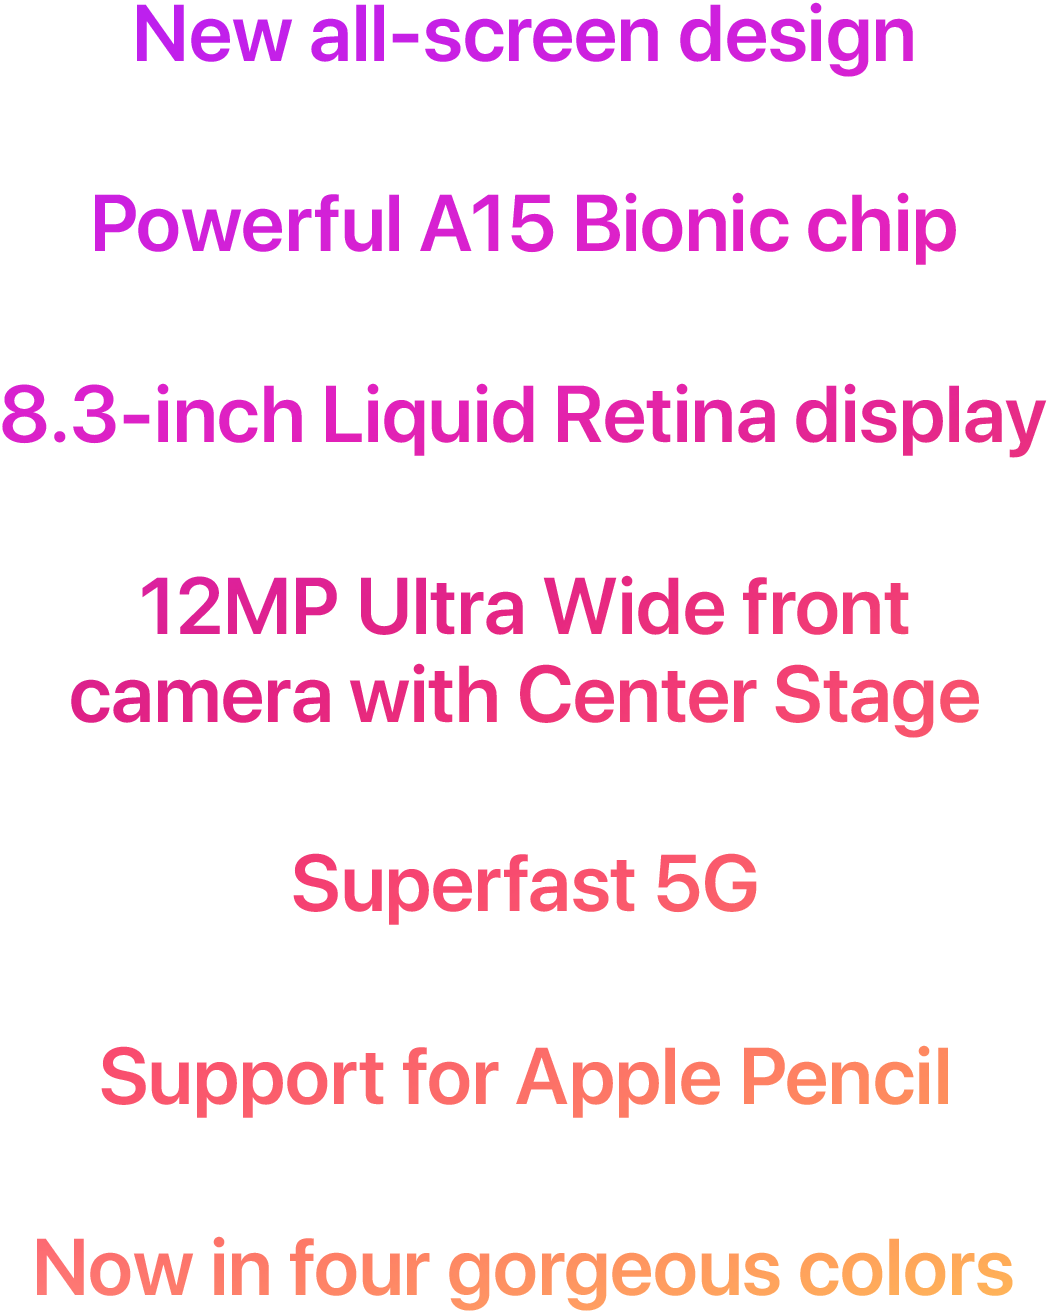 New all-screen design  Powerful A15 Bionic chip  8.3-inch Liquid Retina display  12MP Ultra Wide front camera with Center Stage  Superfast 5G  Support for Apple Pencil  Now in four gorgeous colors